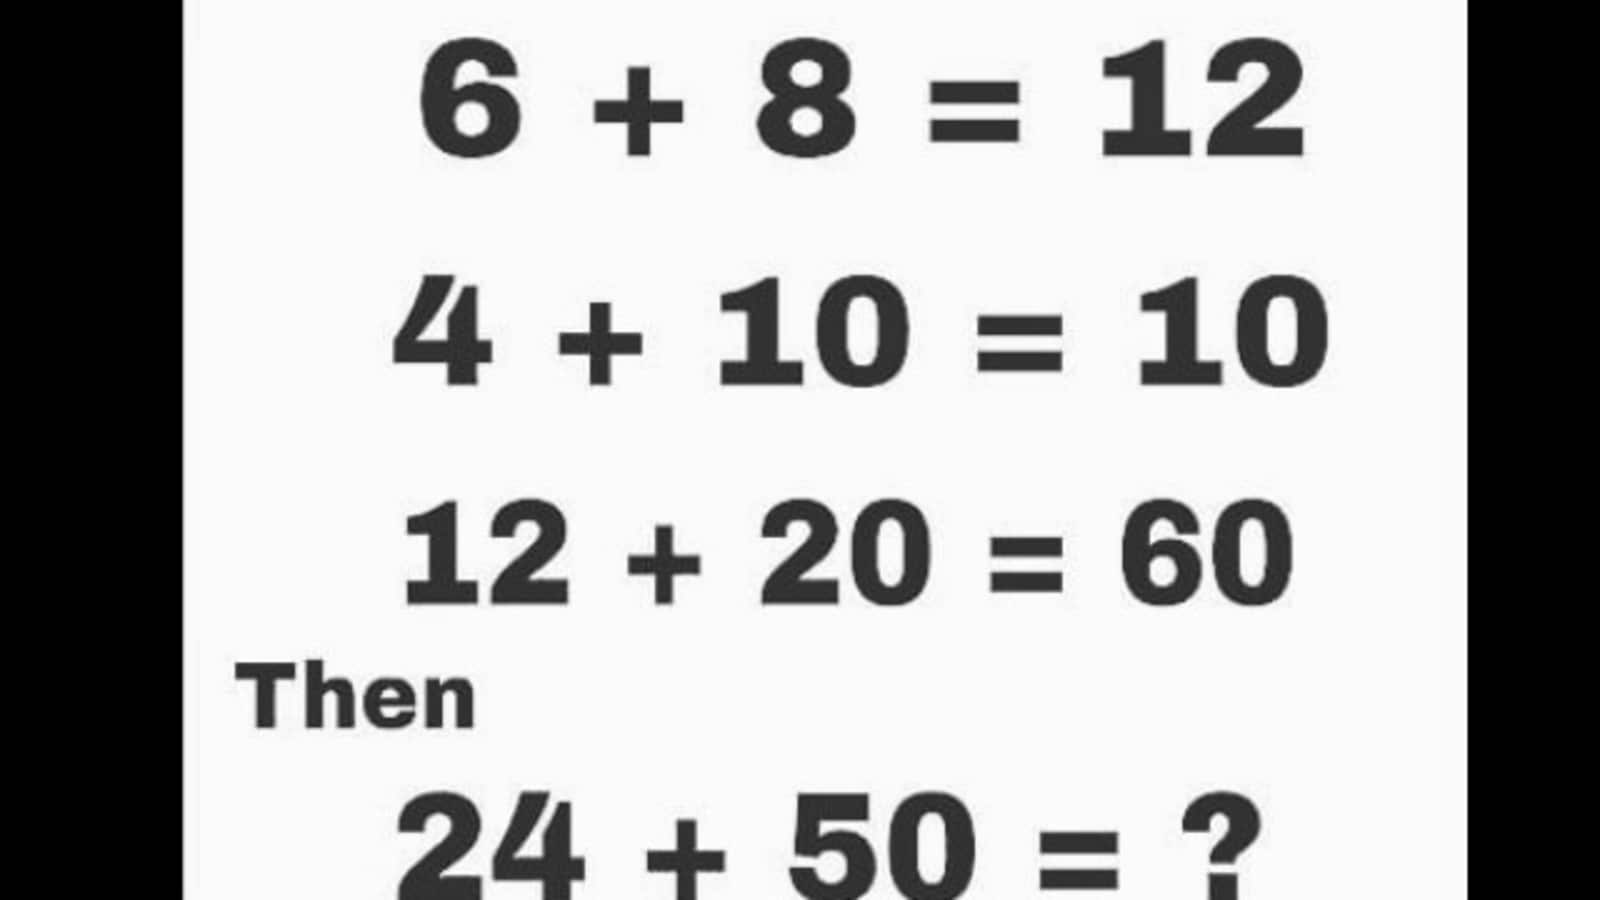 Are you good at maths? This brain teaser will prove your skills